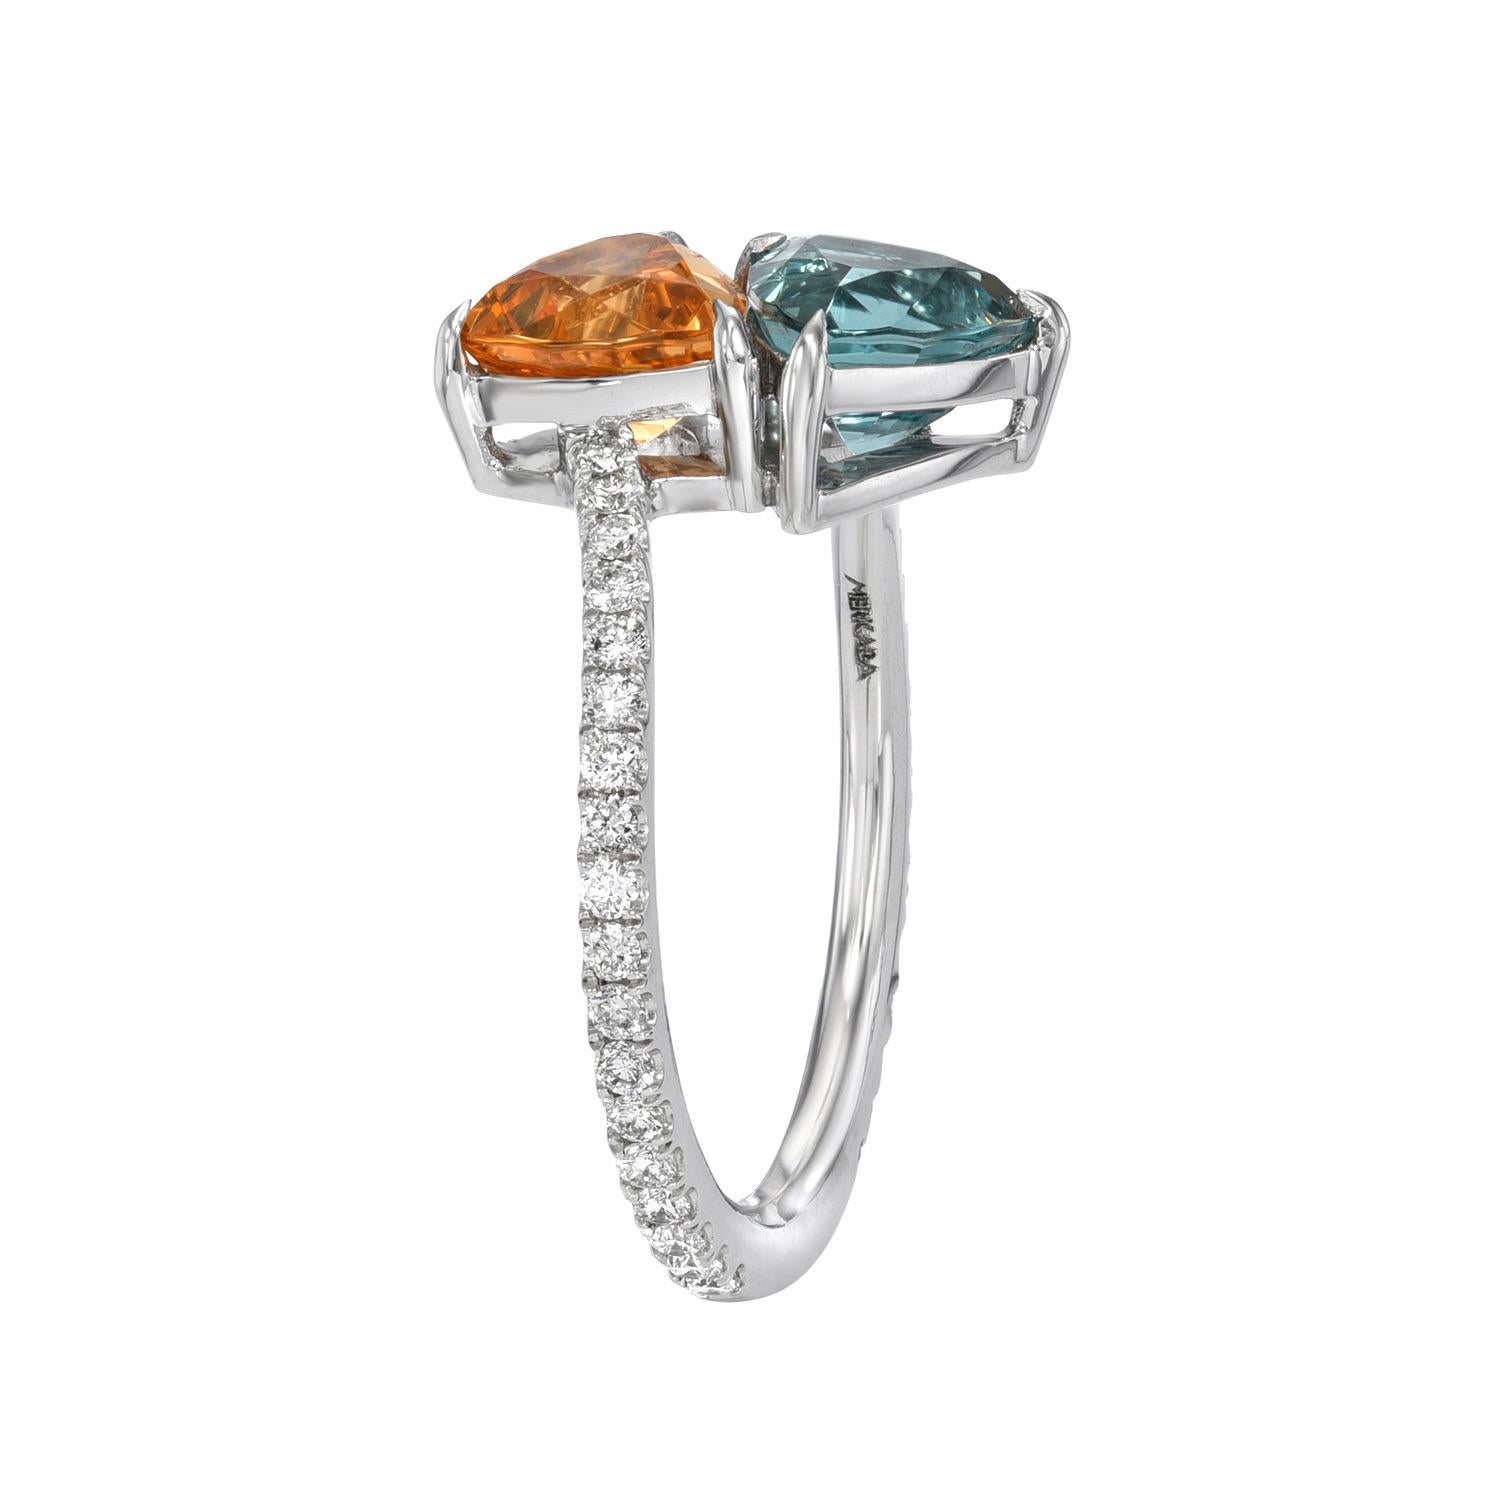 Unique and exclusive mismatched pair of 2.57 carats total Blue Tourmaline and Mandarin Garnet trillions, mounted in this spectacular bypass platinum ring, decorated with a total of 0.62 carat round brilliant collection diamonds.
Ring size 6.